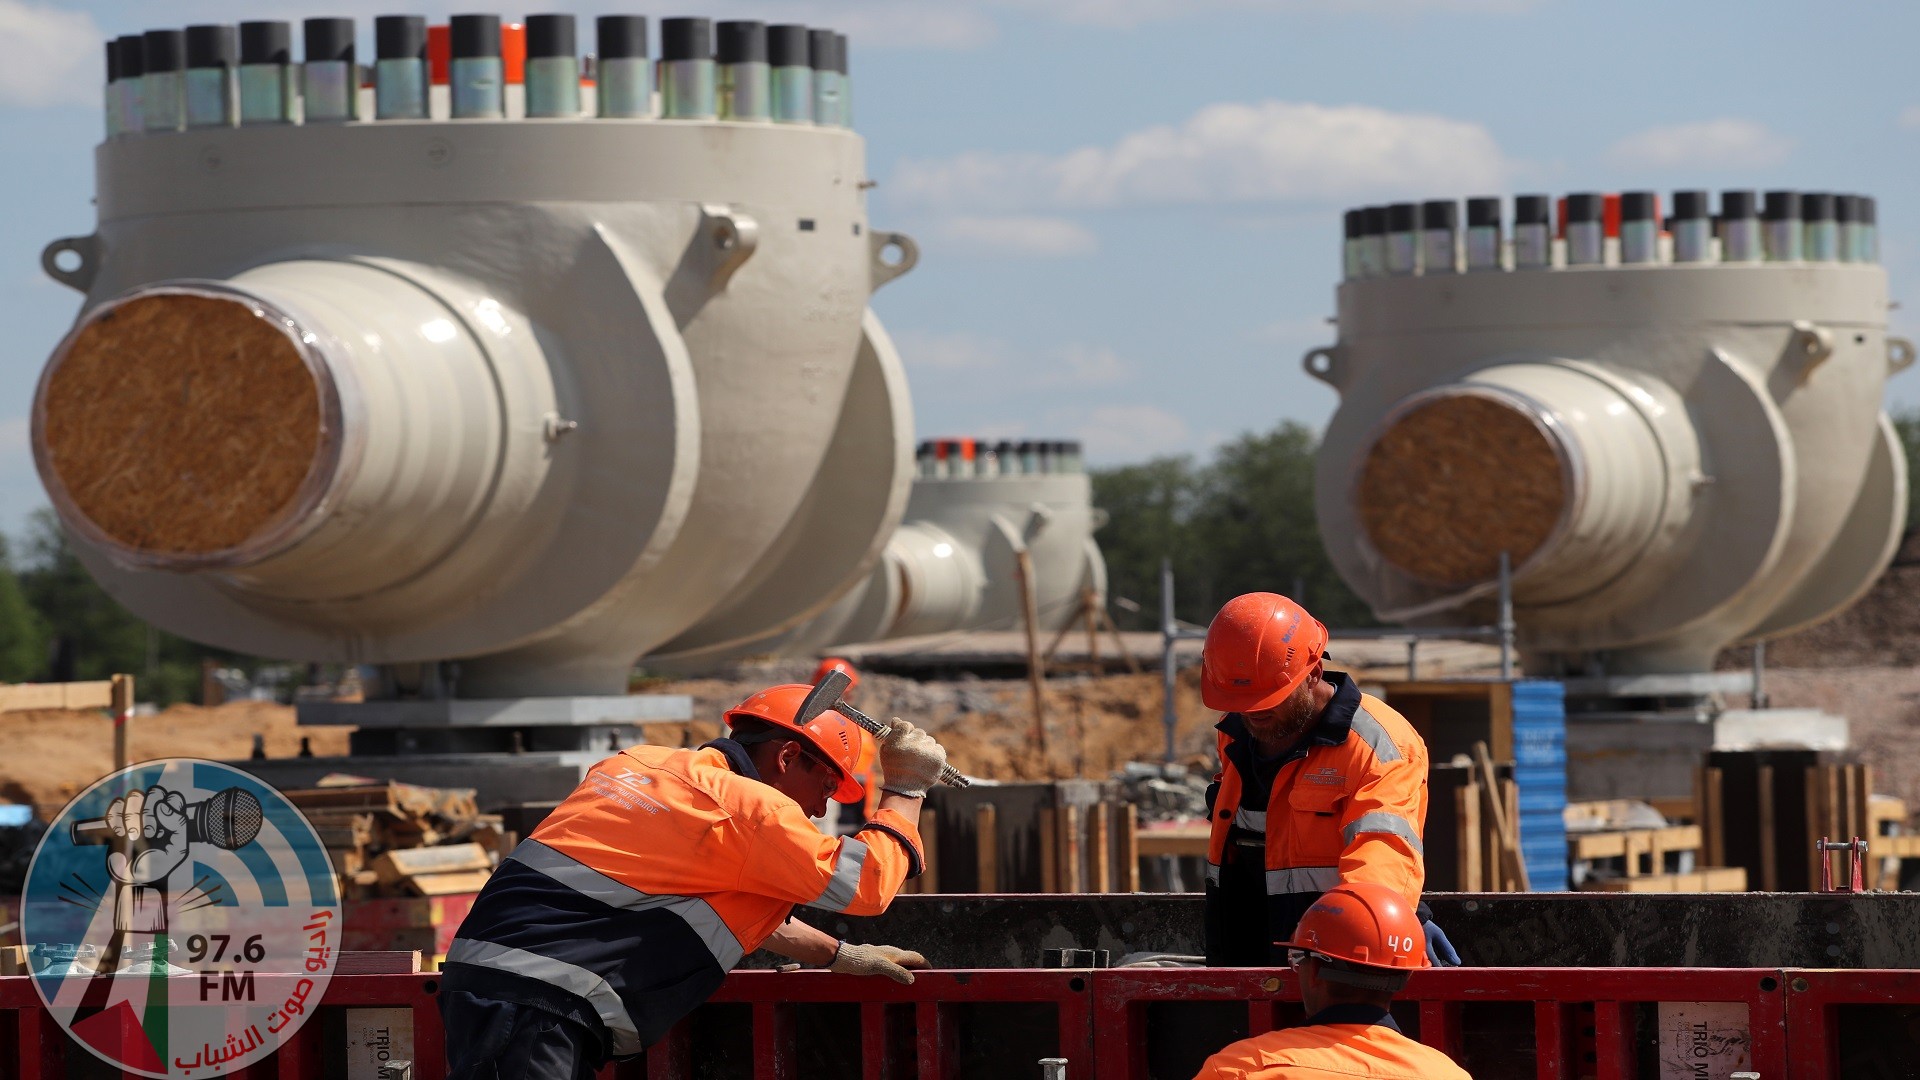 LENINGRAD REGION, RUSSIA - JUNE 5, 2019: The construction site of a section of the Nord Stream 2 natural gas pipeline near Kingisepp, Leningrad Region. Alexander Demianchuk/TASS (Photo by Alexander DemianchukTASS via Getty Images)